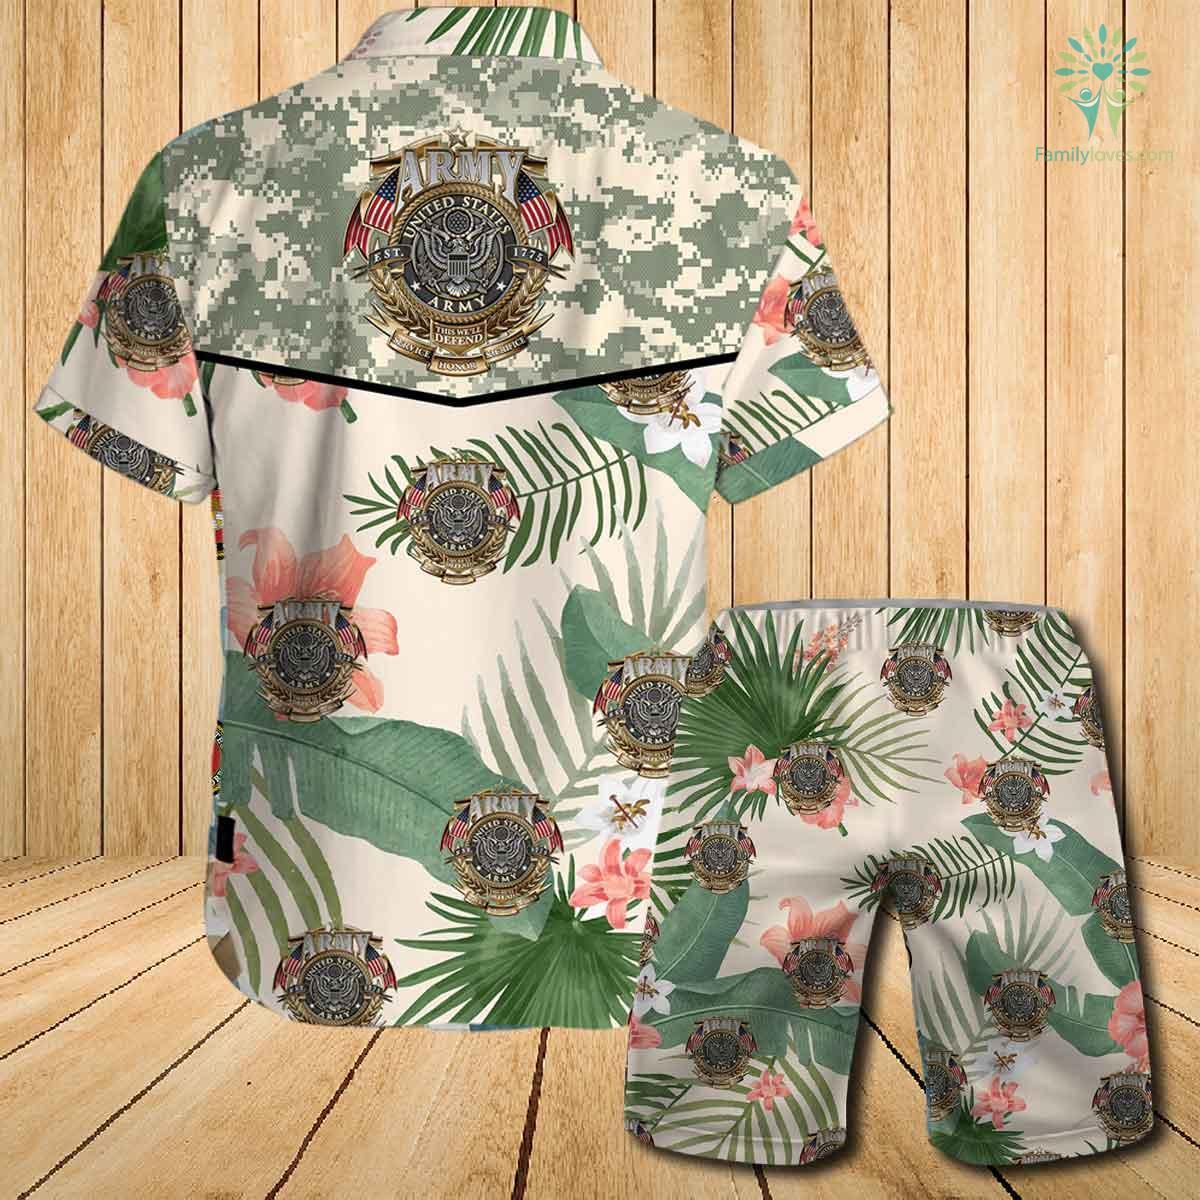 US army this well defend since 1775 honor service sacrifice all over printed hawaiian shirt